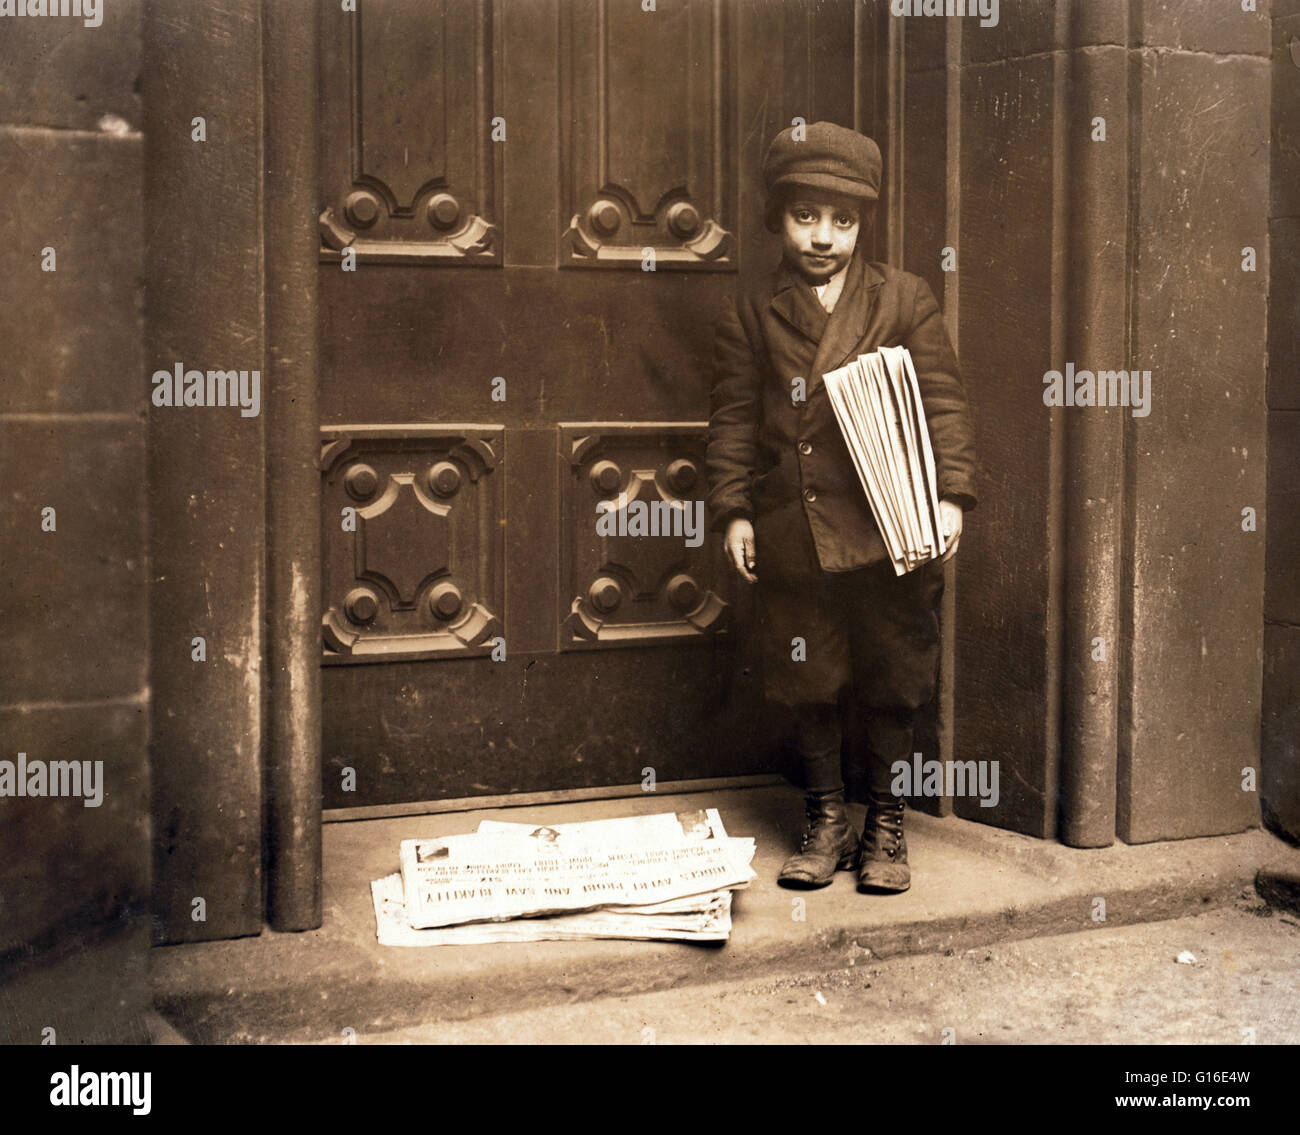 Entitled: 'Newsboy, 1913.' Date based on captions for neighboring numbers. 'Pittsburg' may be in text at top of newspaper on ground, but neighboring newsboy photos taken in New York. Headline appears to be 'Judges avert probe and Save Blakeley.' The posit Stock Photo